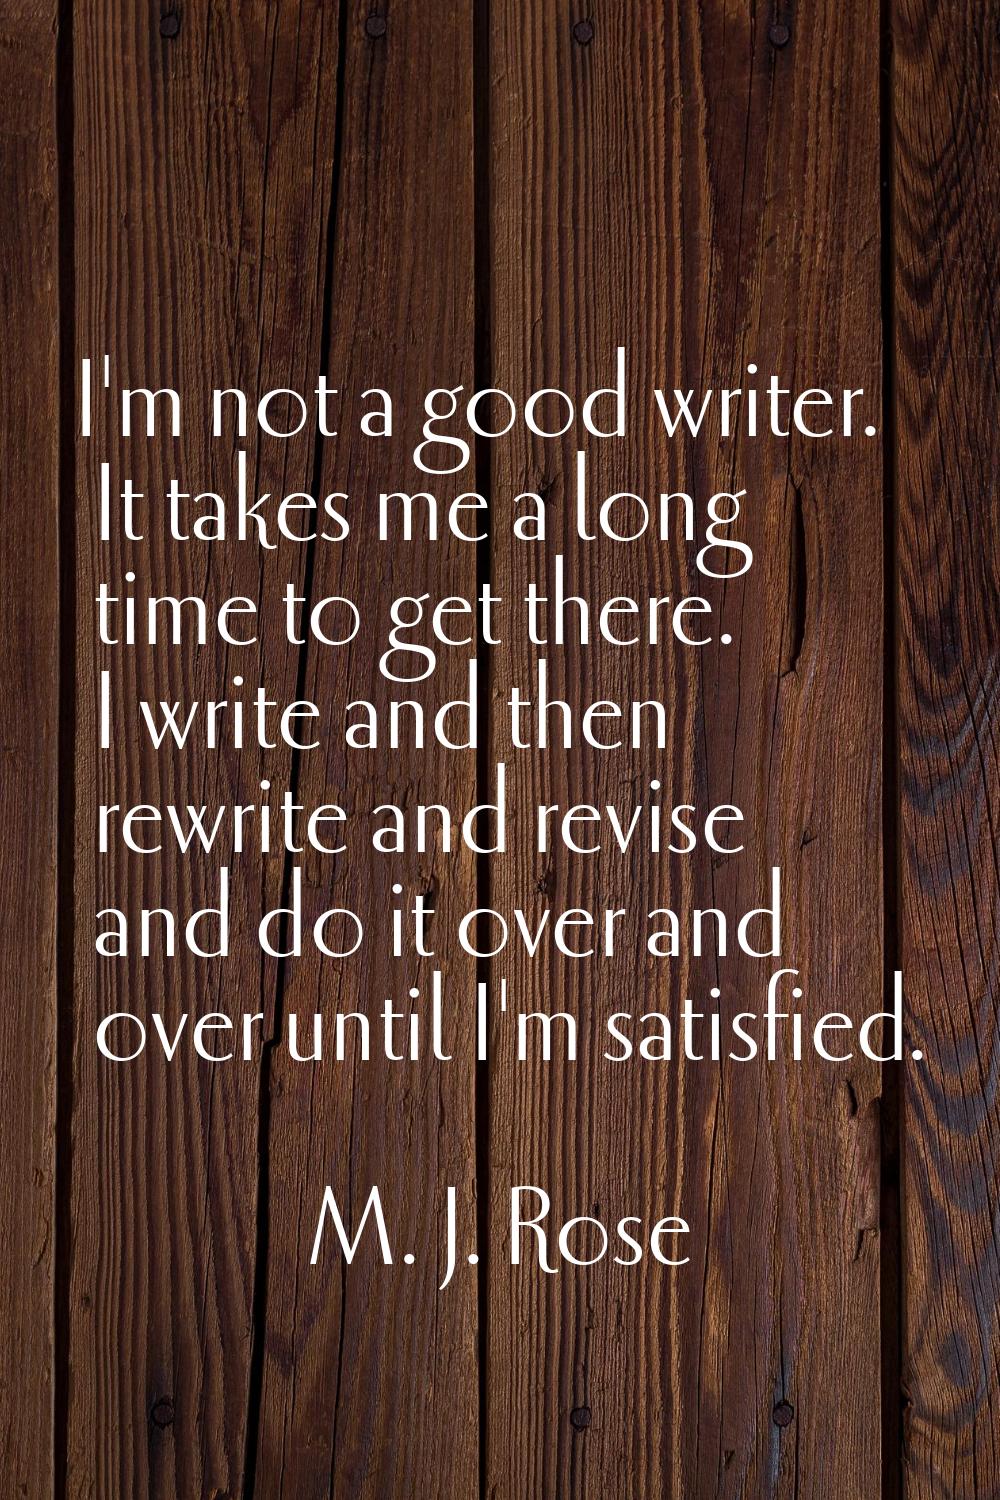 I'm not a good writer. It takes me a long time to get there. I write and then rewrite and revise an